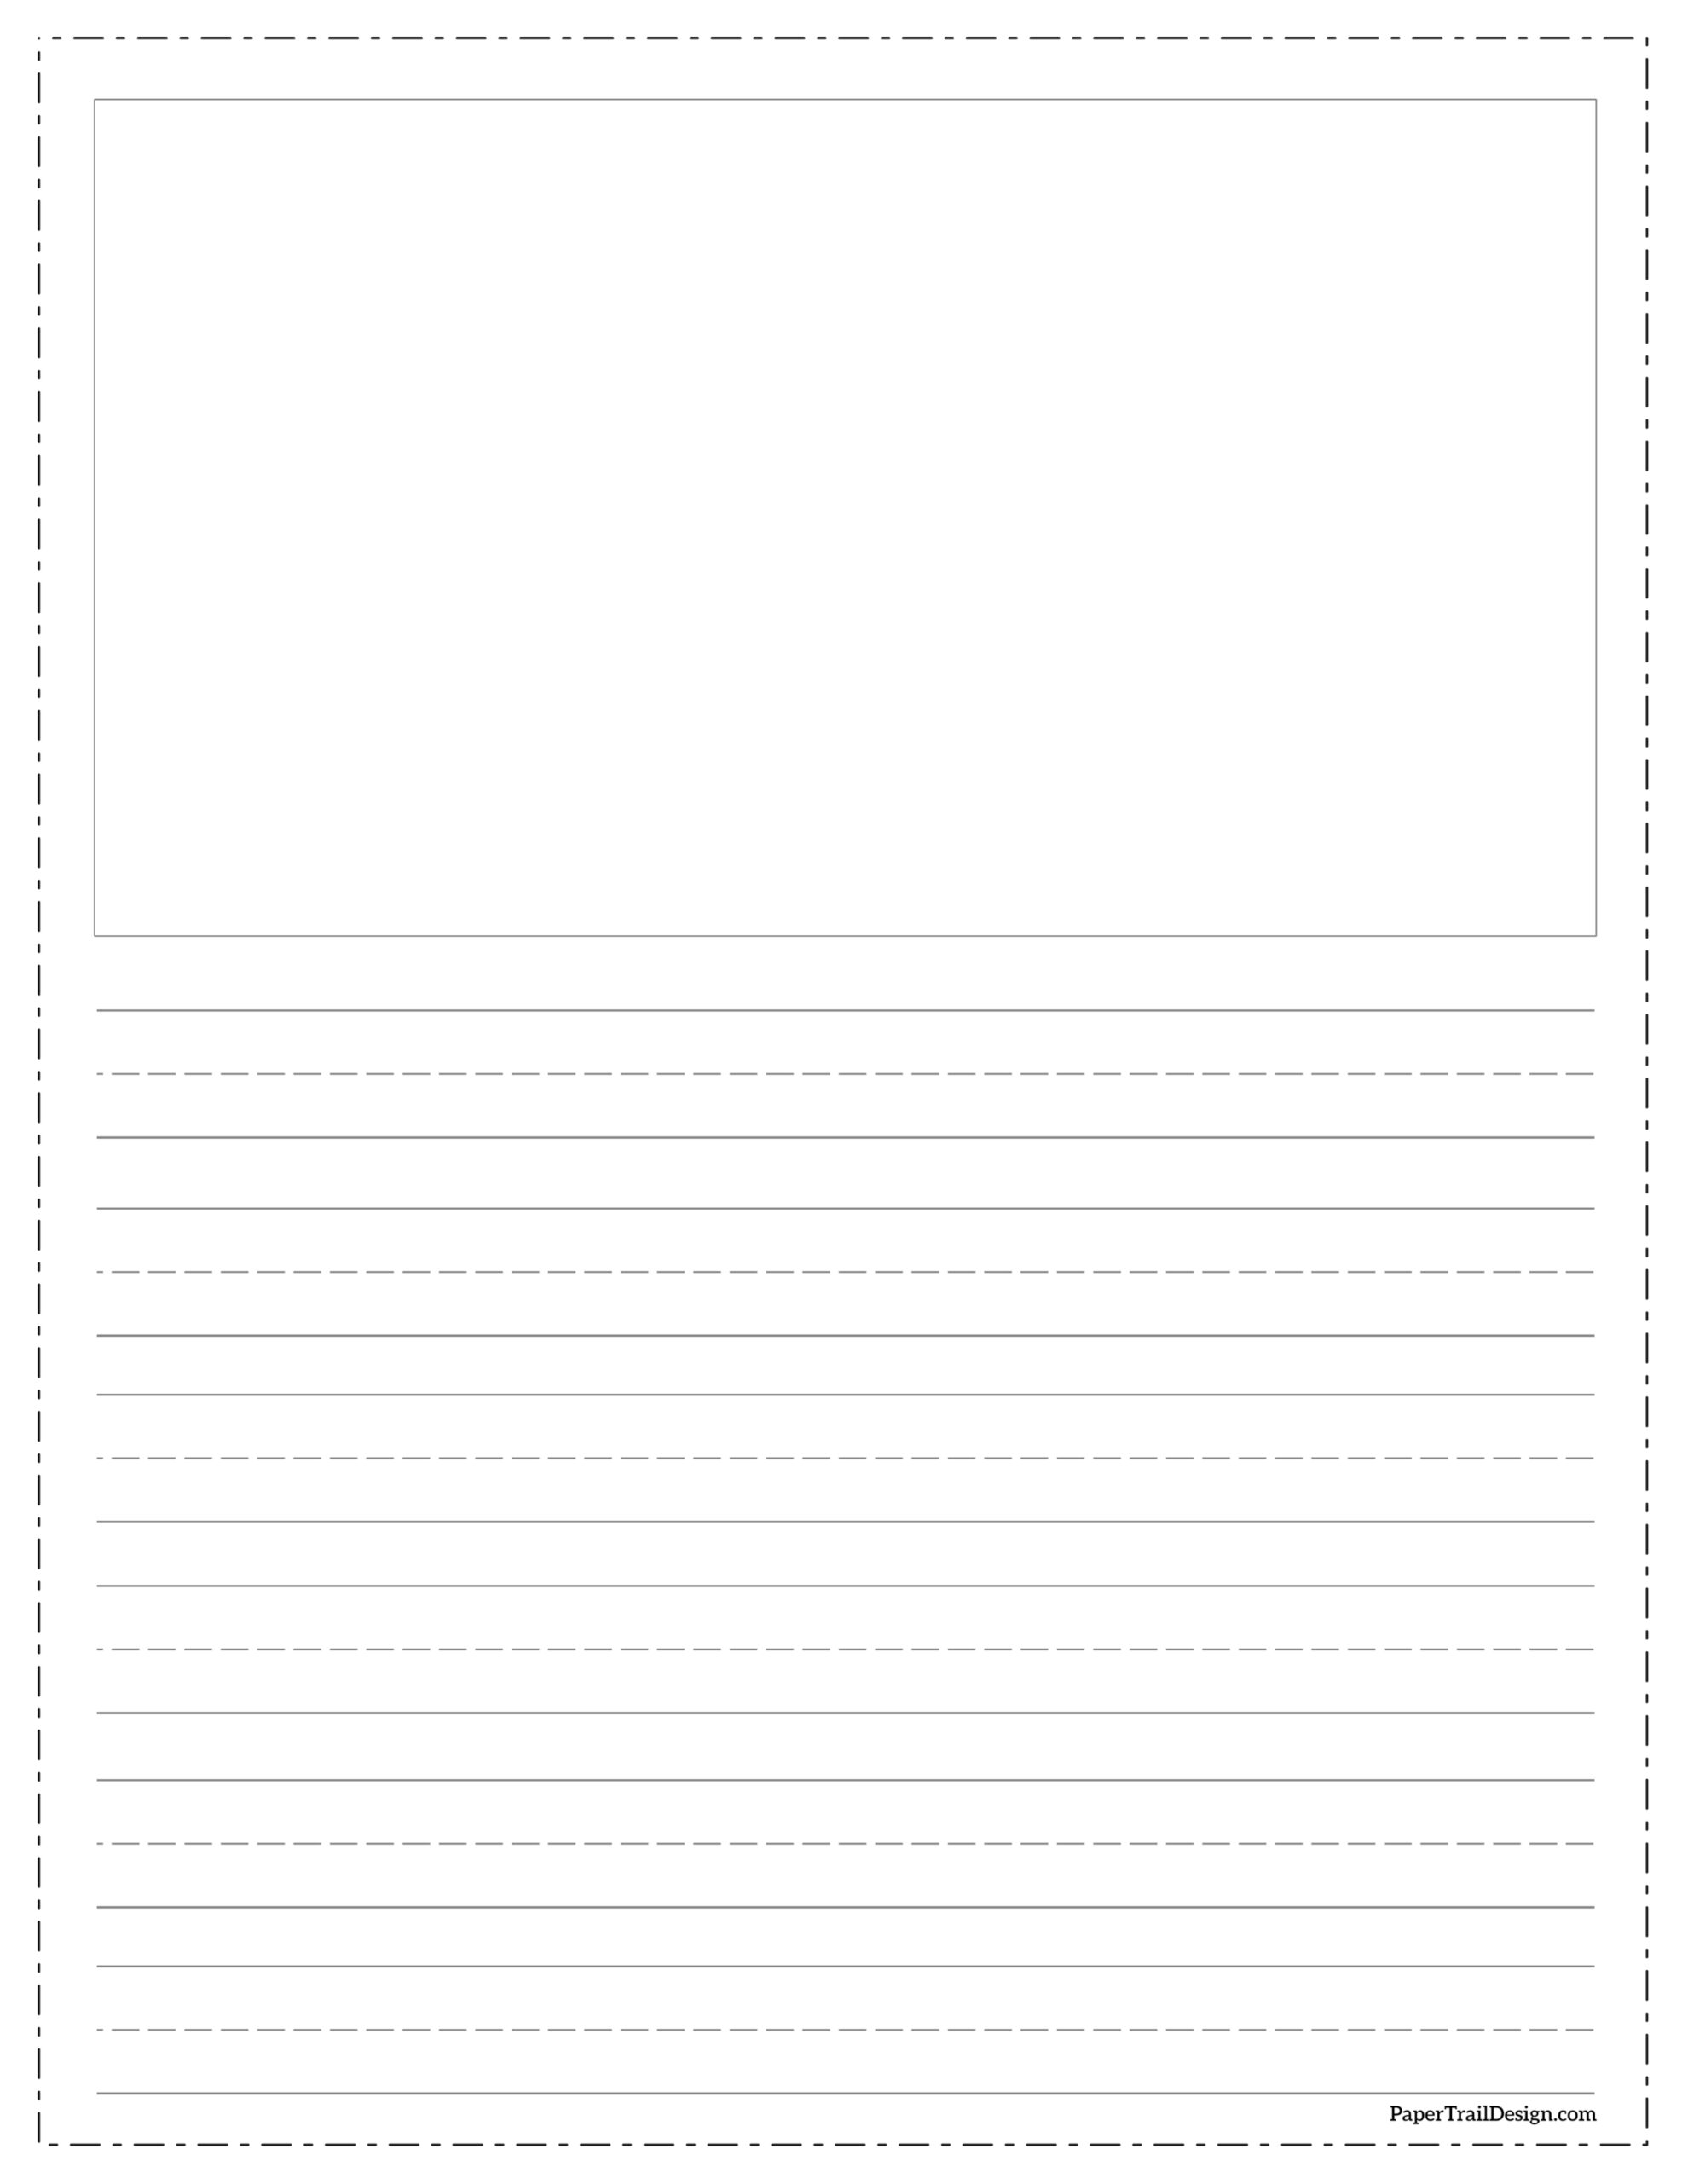 free-printable-lined-writing-paper-with-drawing-box-paper-trail-design